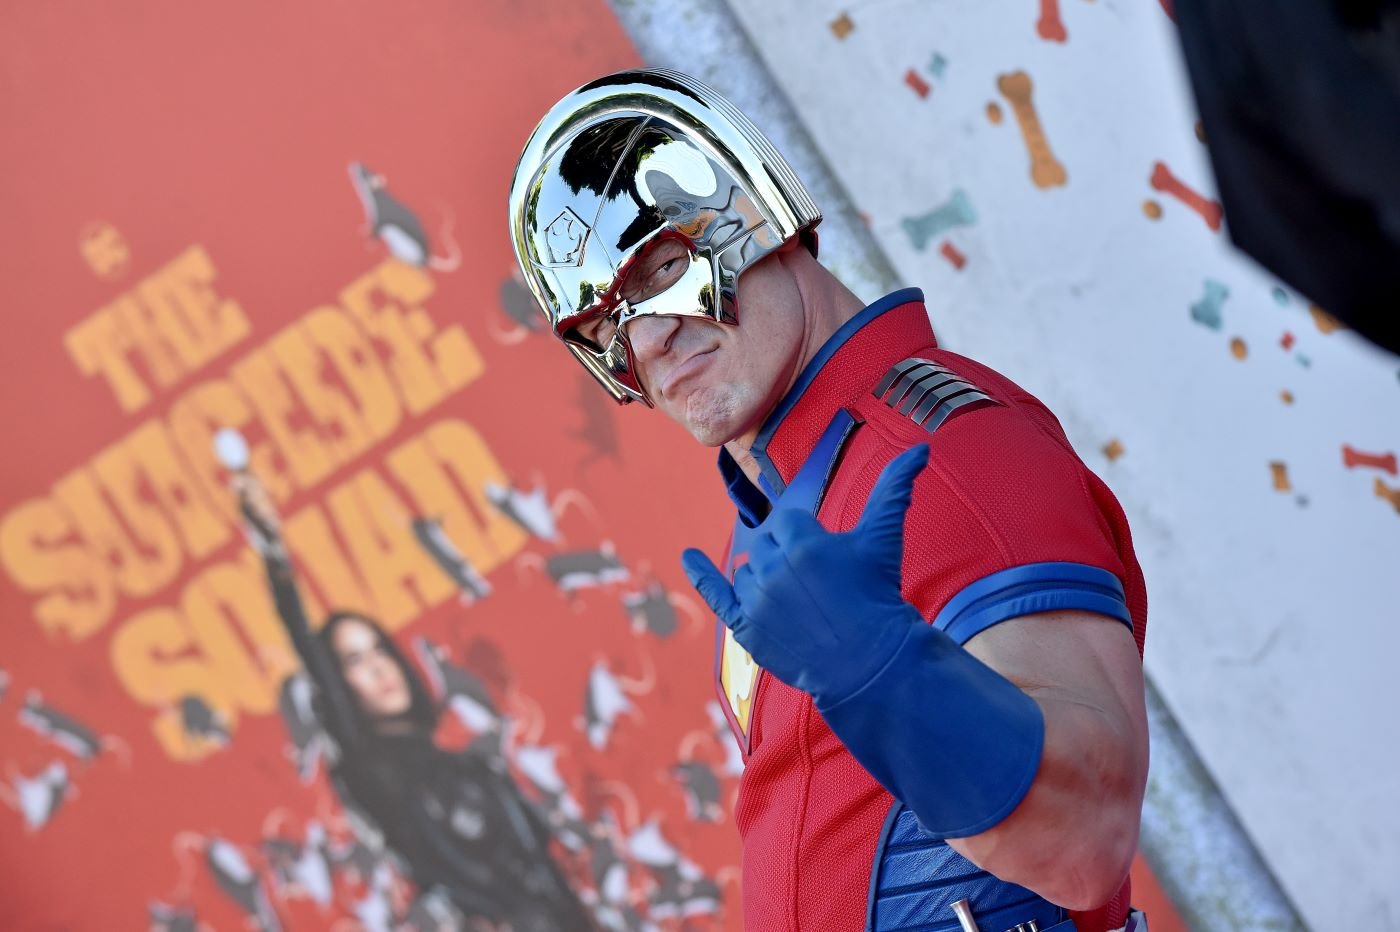 John Cena dressed as a DC superhero, Peacemaker, standing in front of a background of a Suicide Squad poster with confetti.